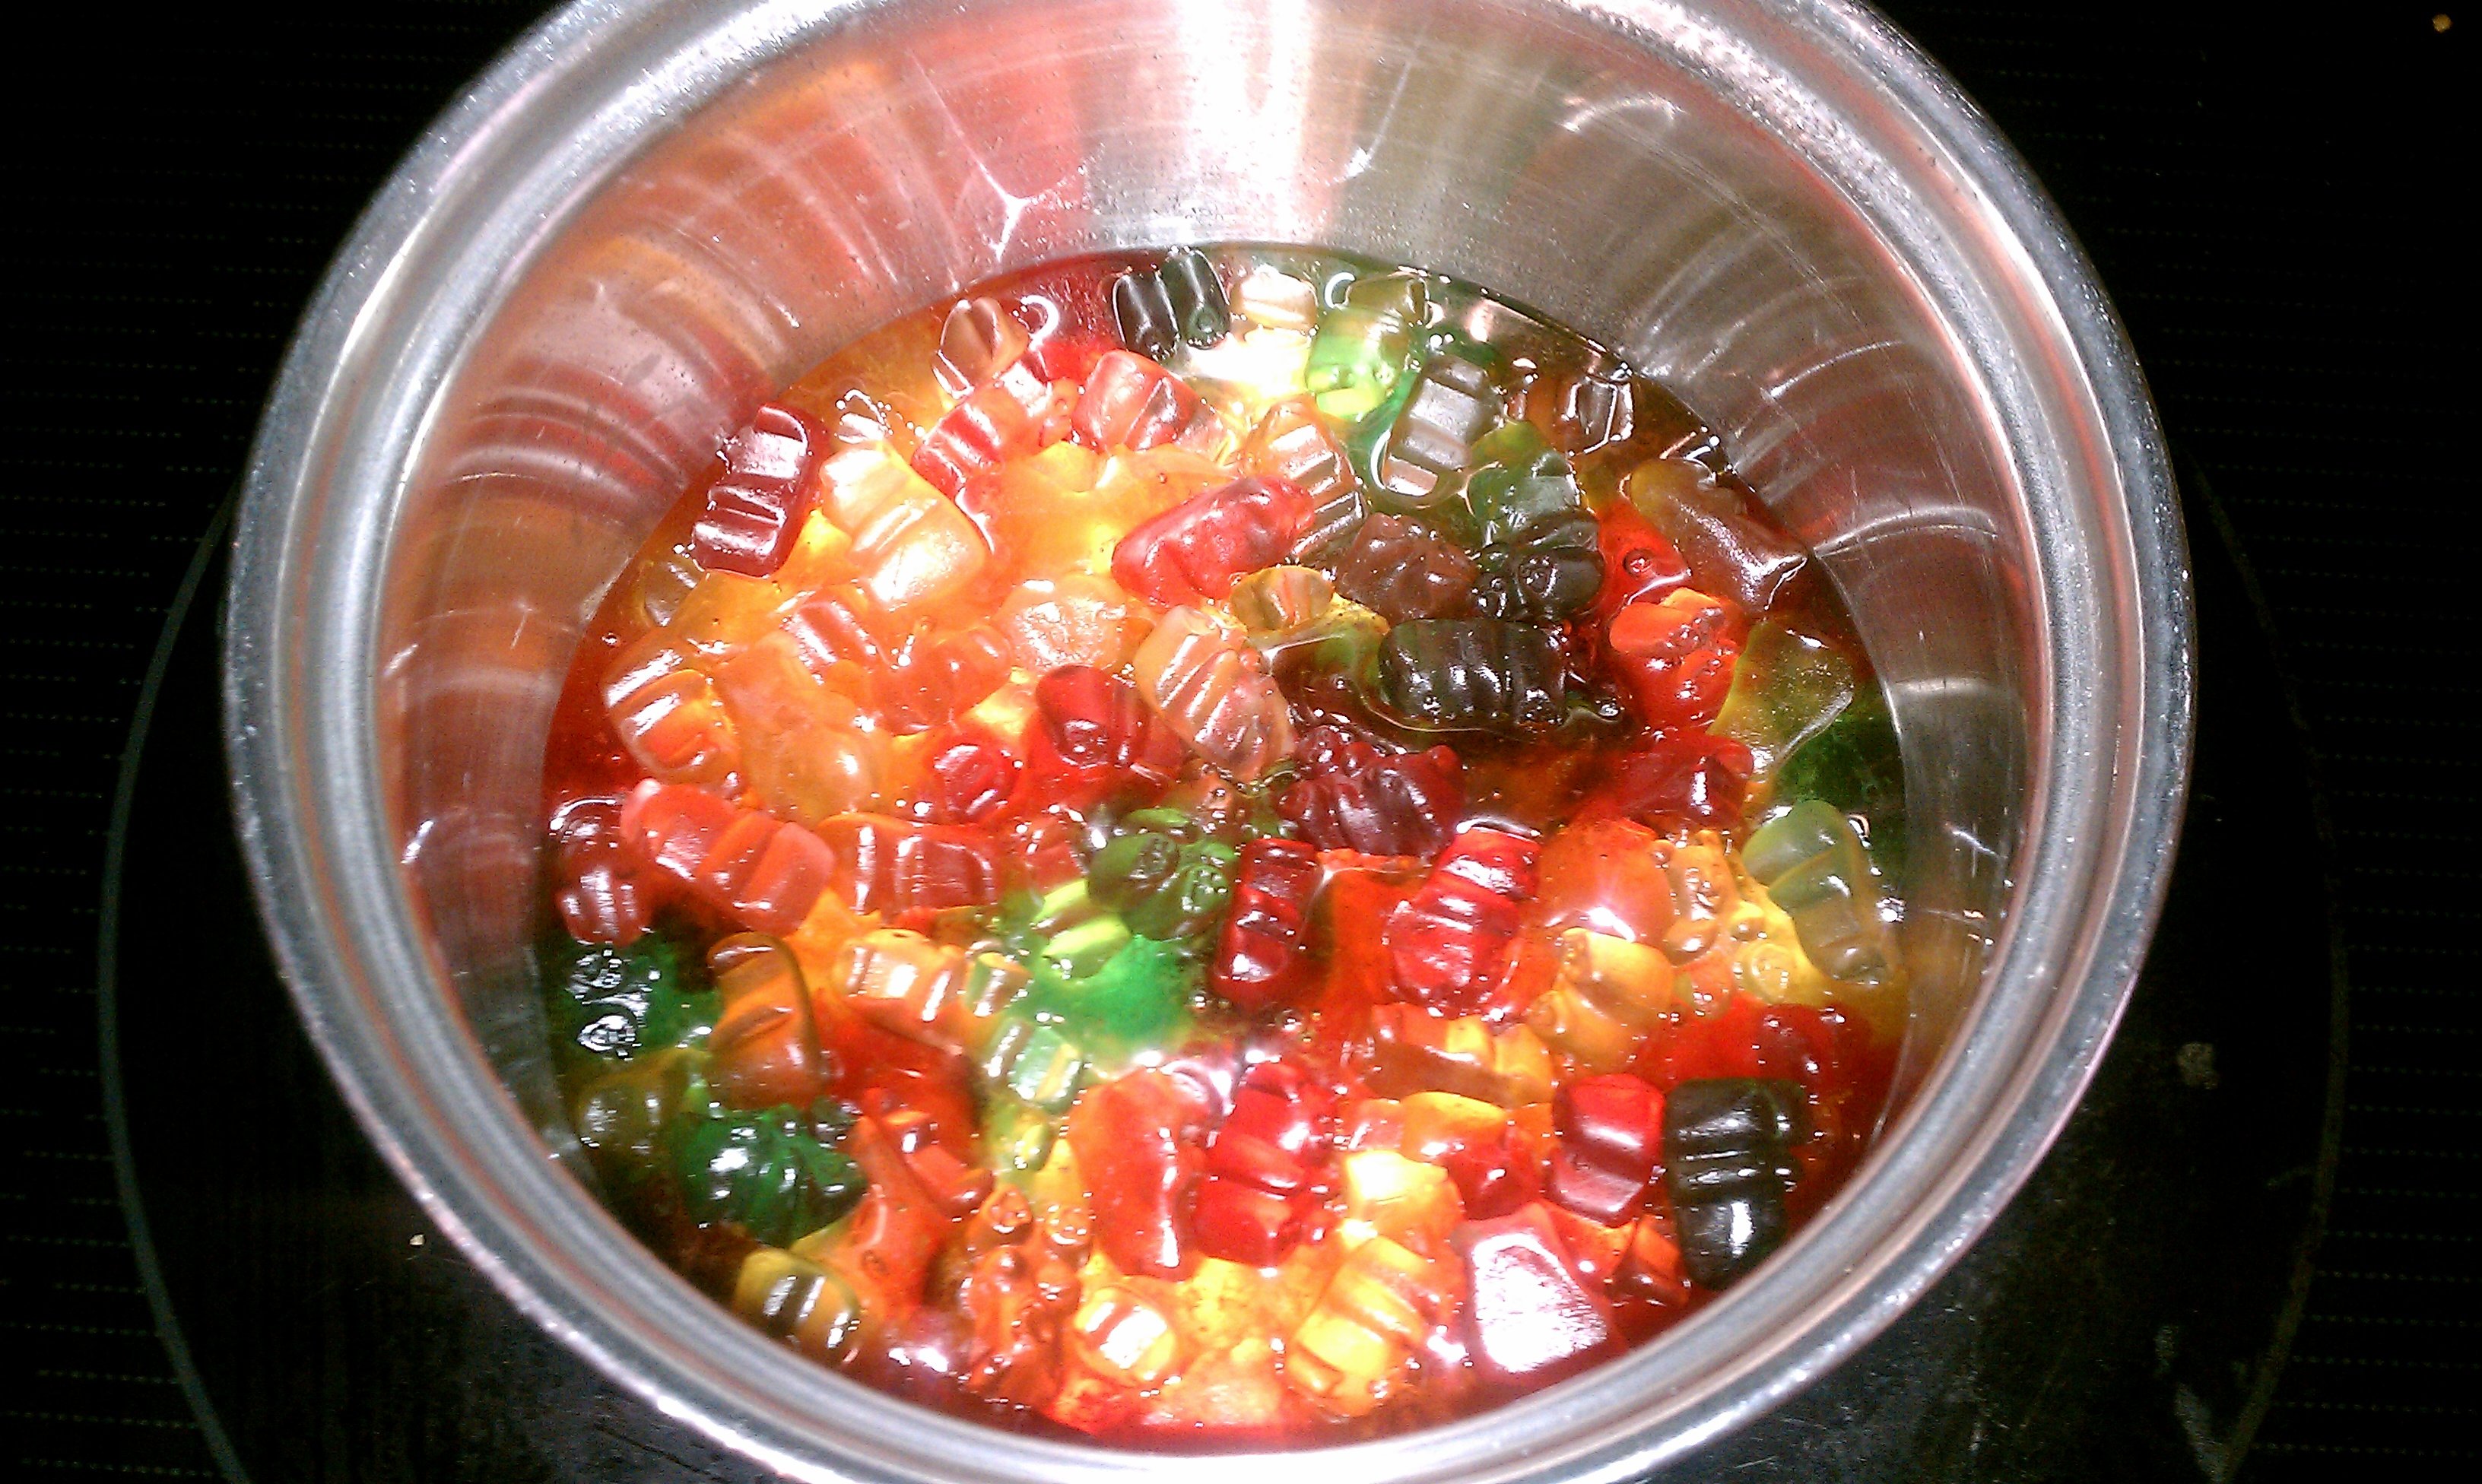 Almost Unschoolers: Giant Homemade Gummy Bears